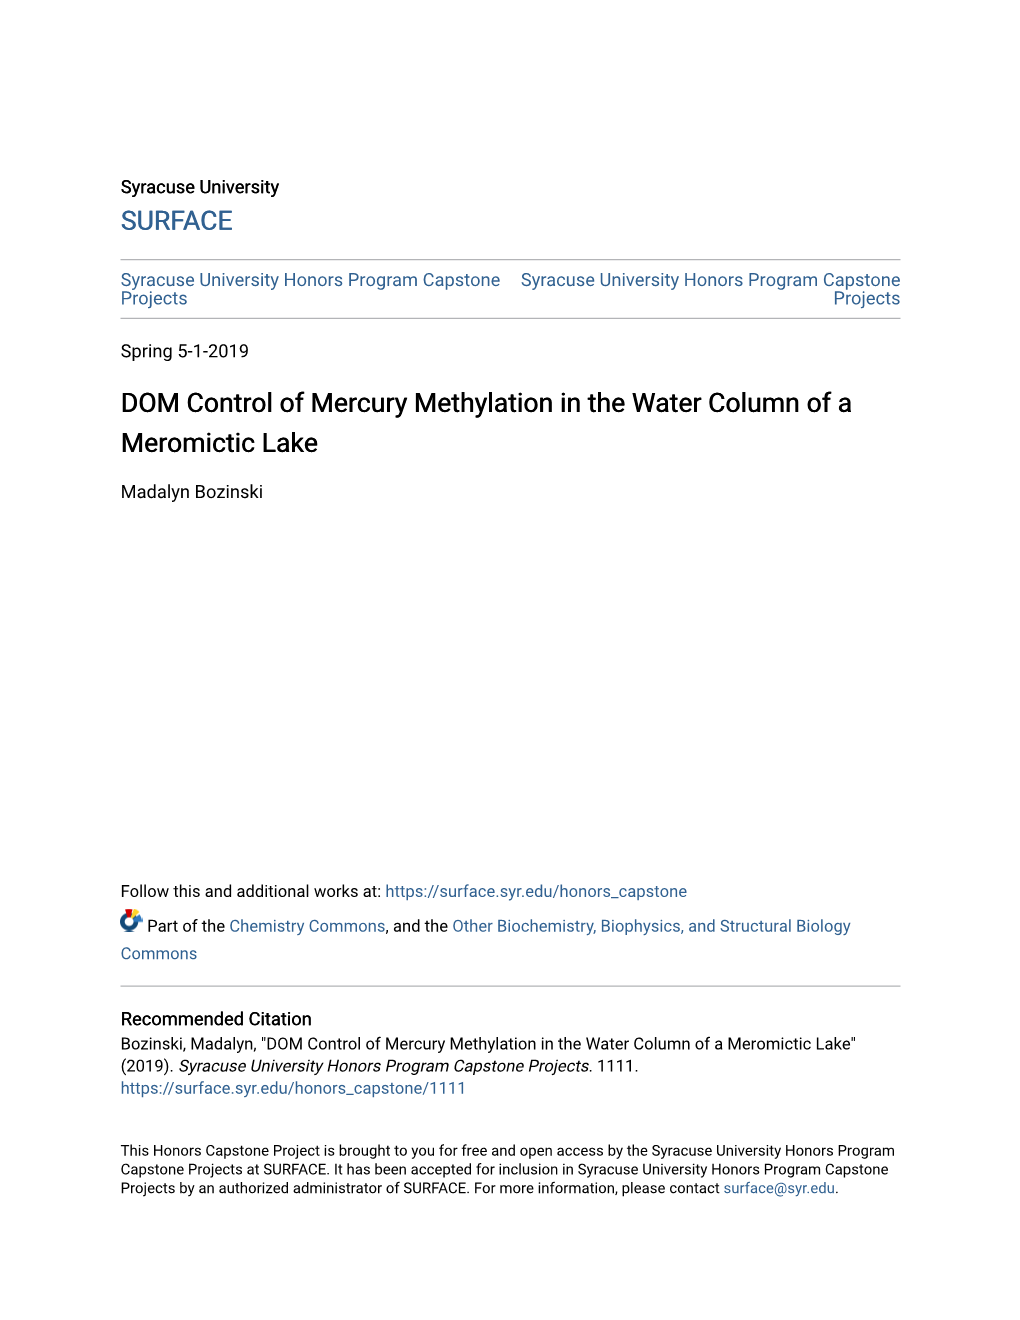 DOM Control of Mercury Methylation in the Water Column of a Meromictic Lake